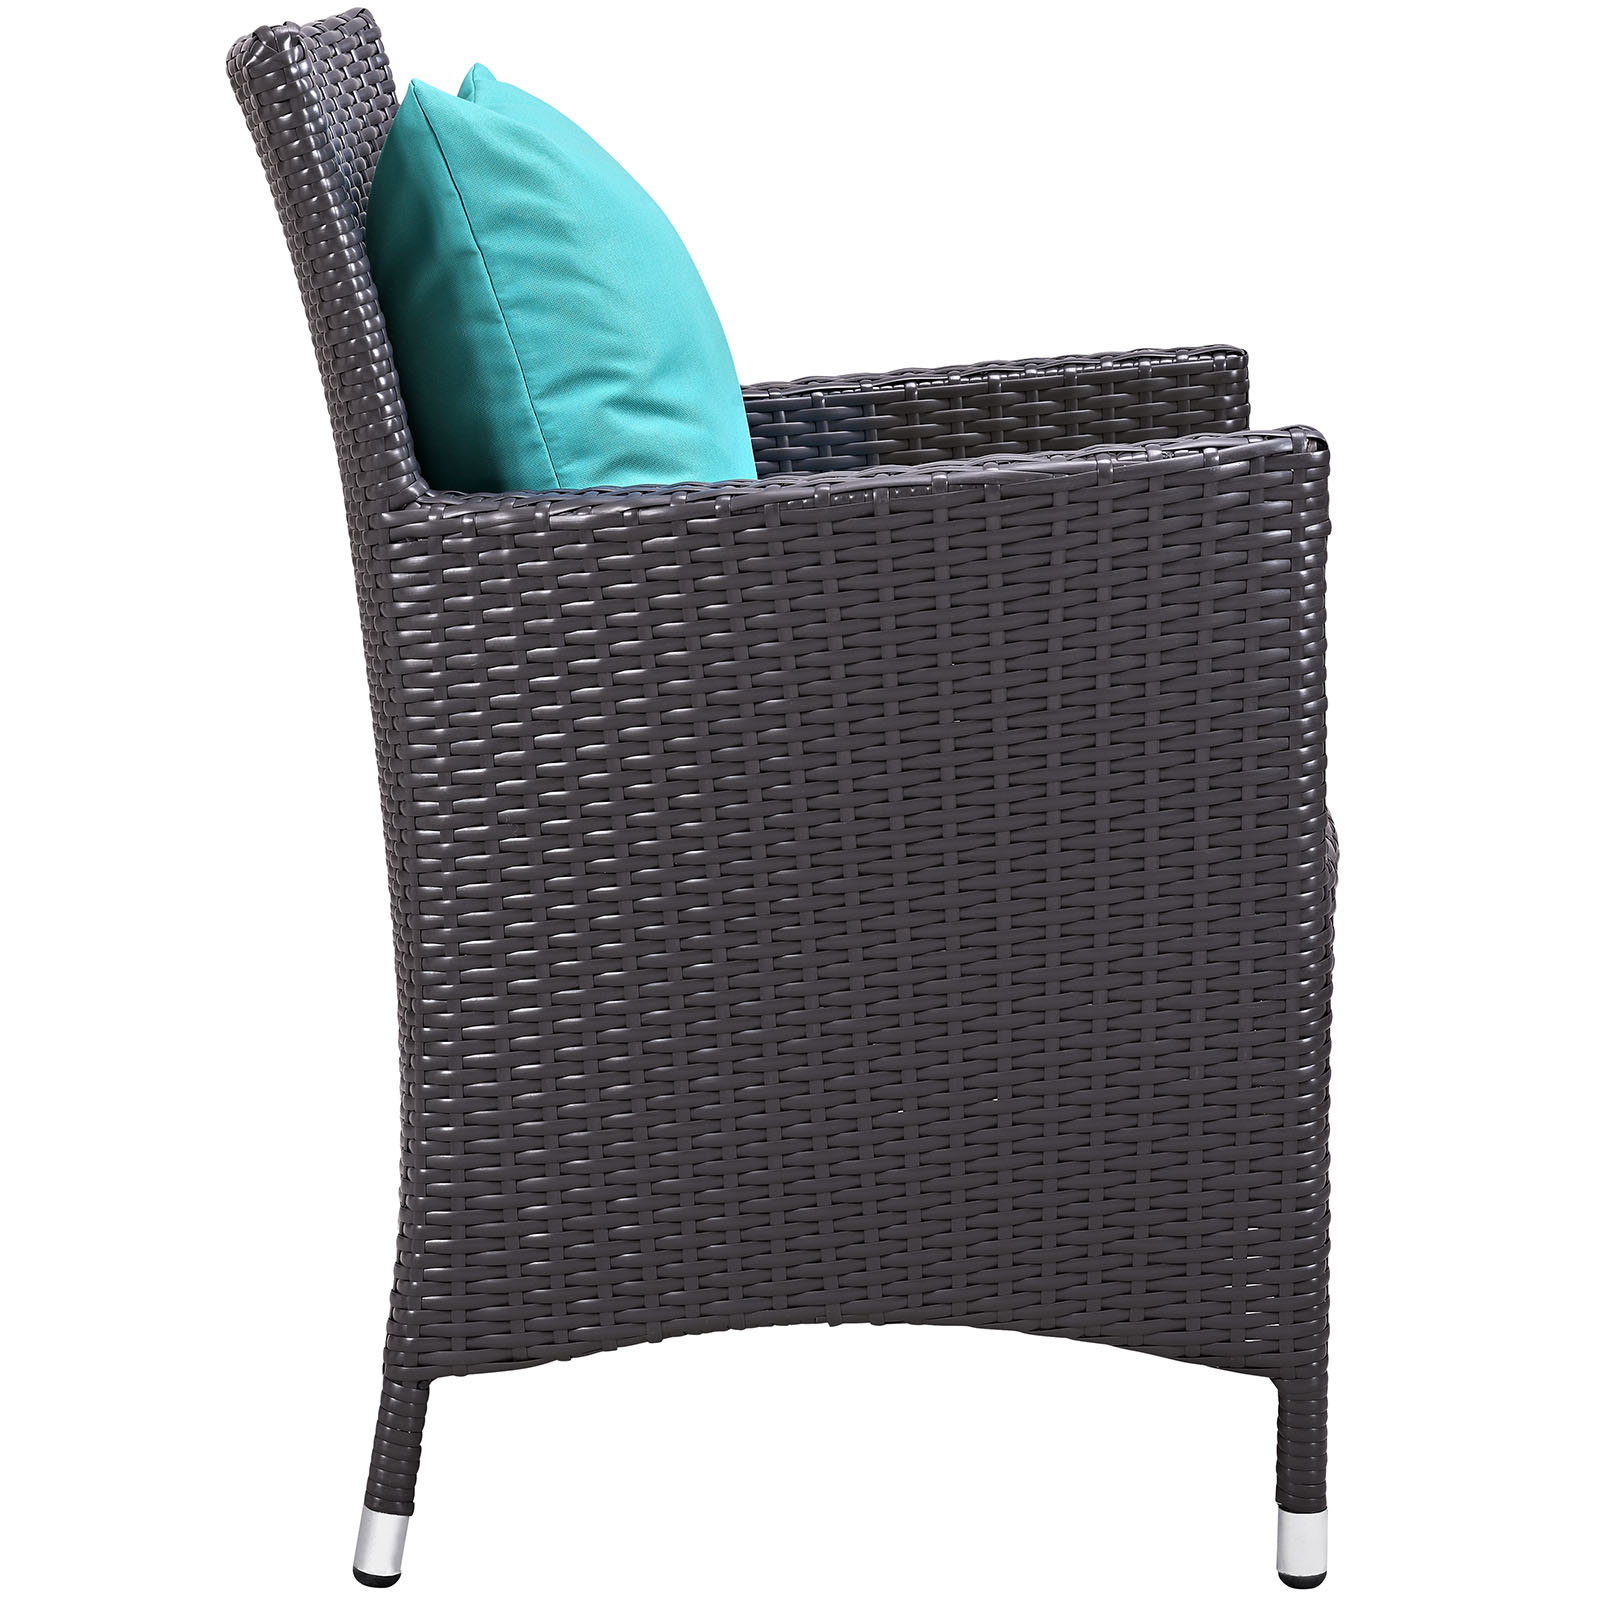 Modway Convene 8 Piece Outdoor Patio Dining Set in Espresso Turquoise - image 4 of 6